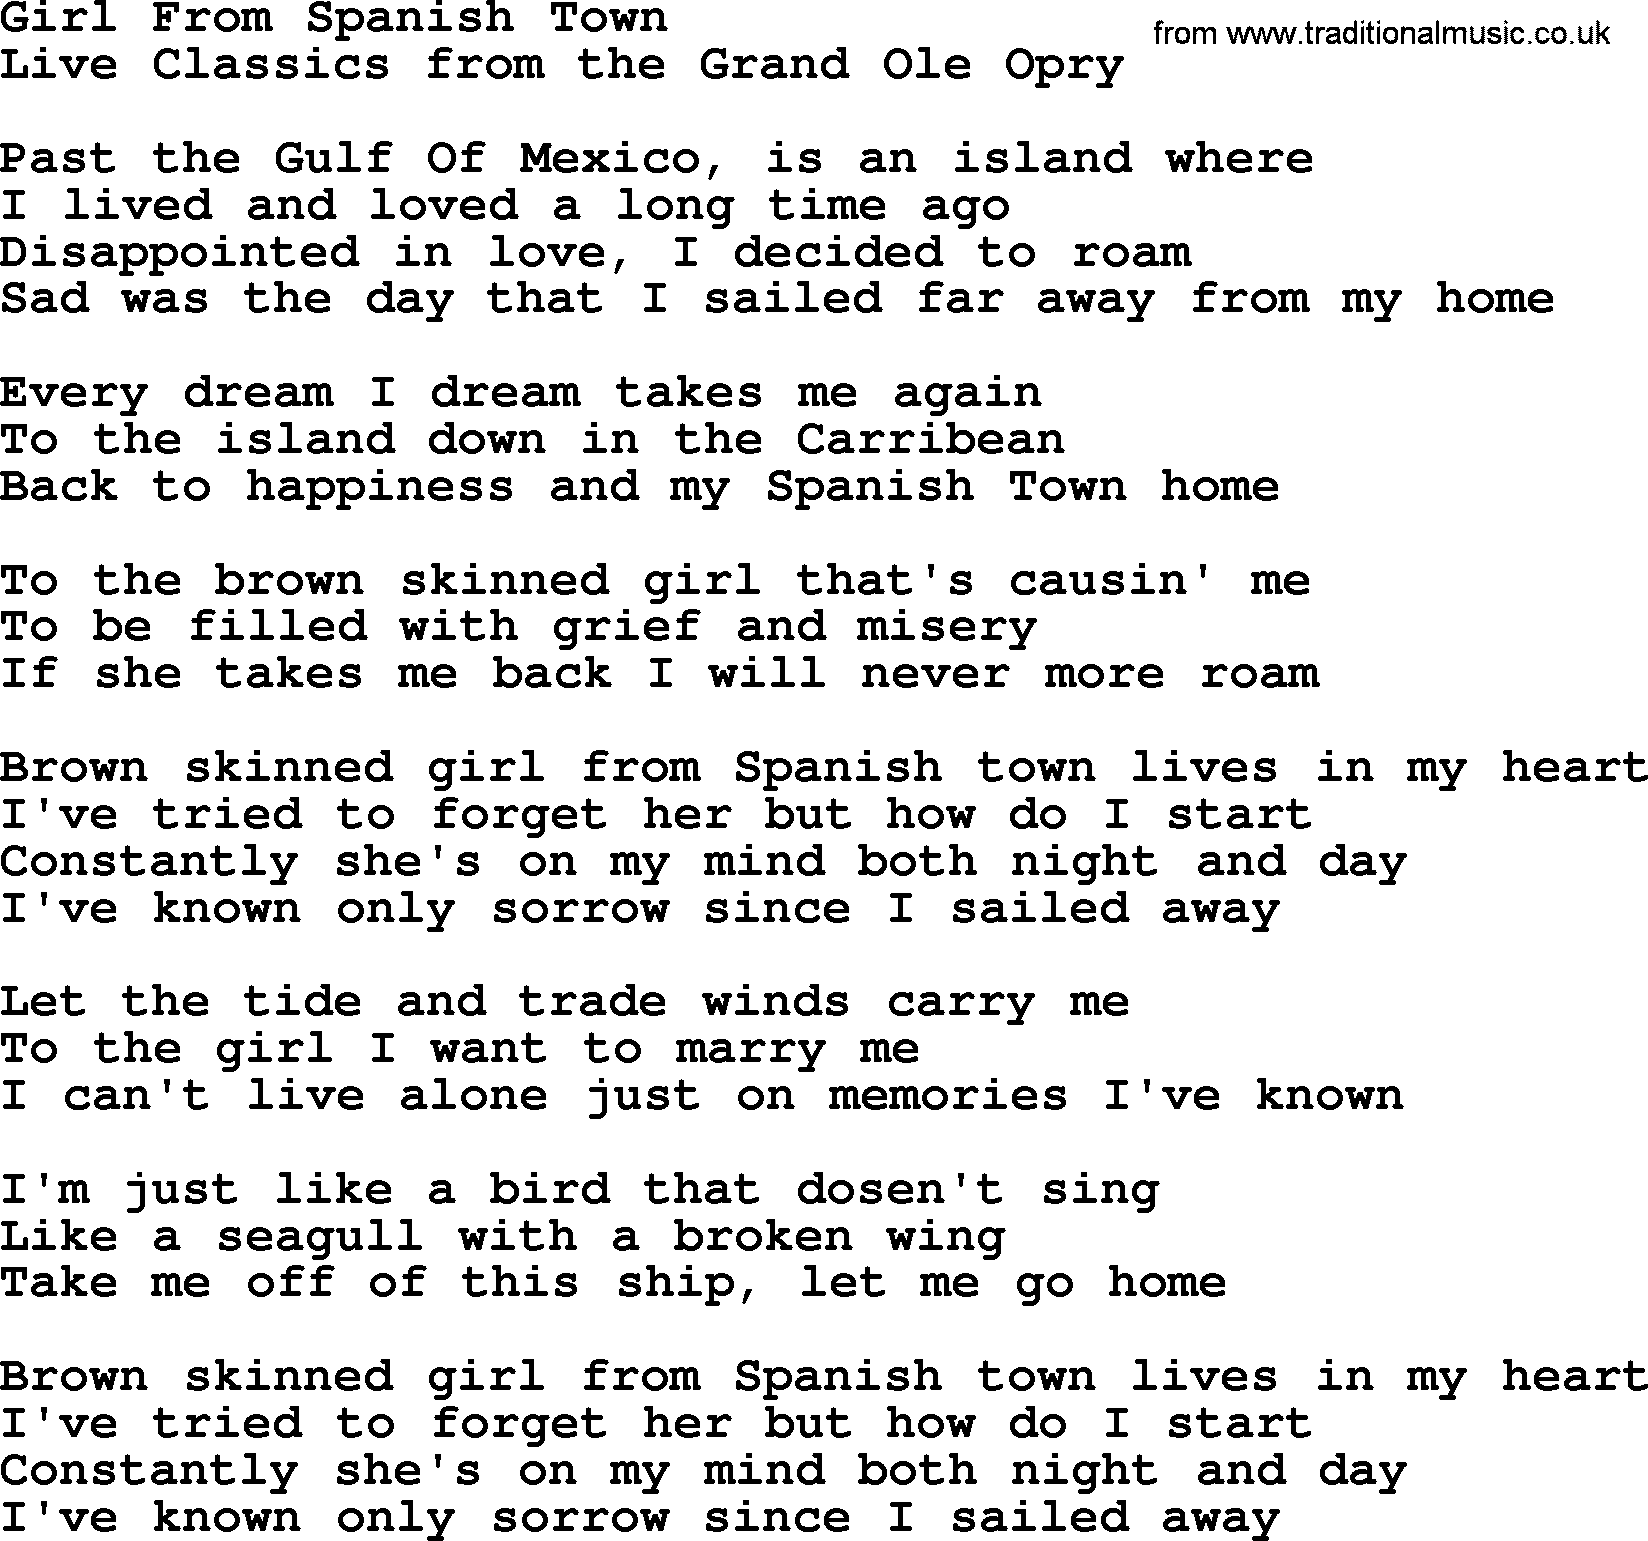 Marty Robbins song: Girl From Spanish Town, lyrics